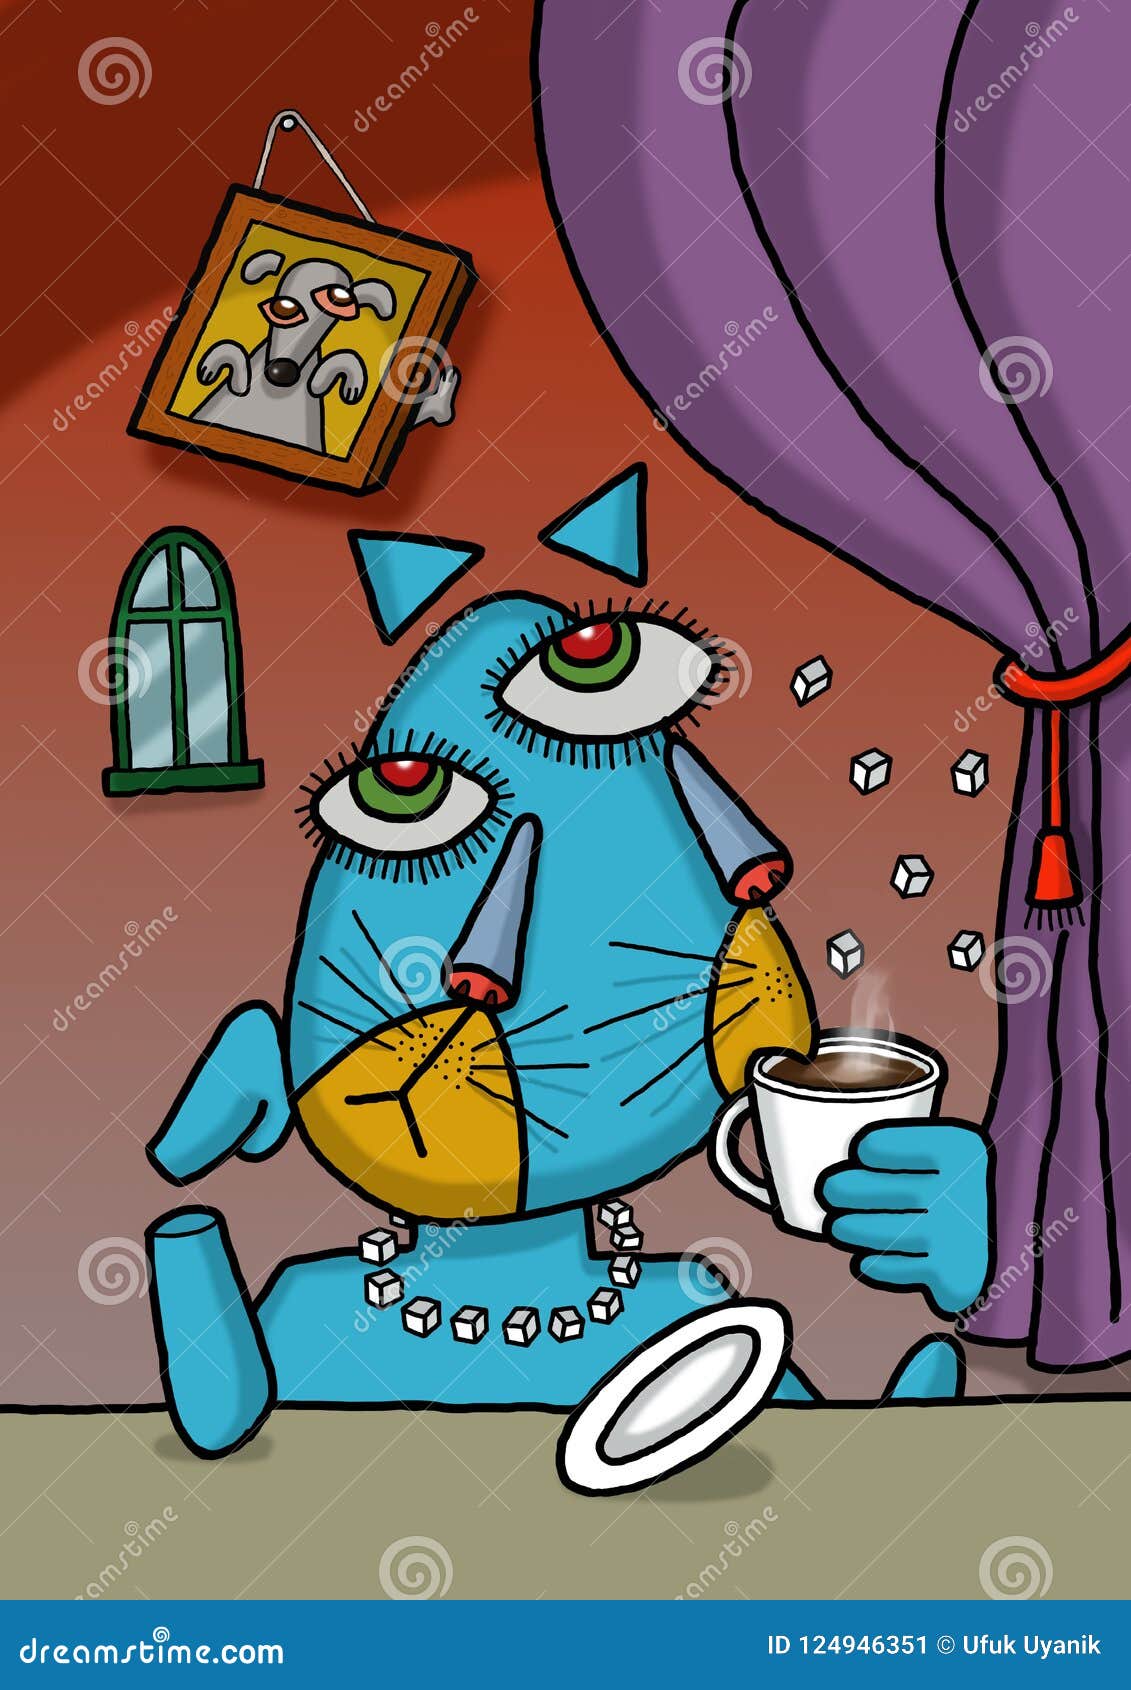 cat is drinking coffee in picasso style